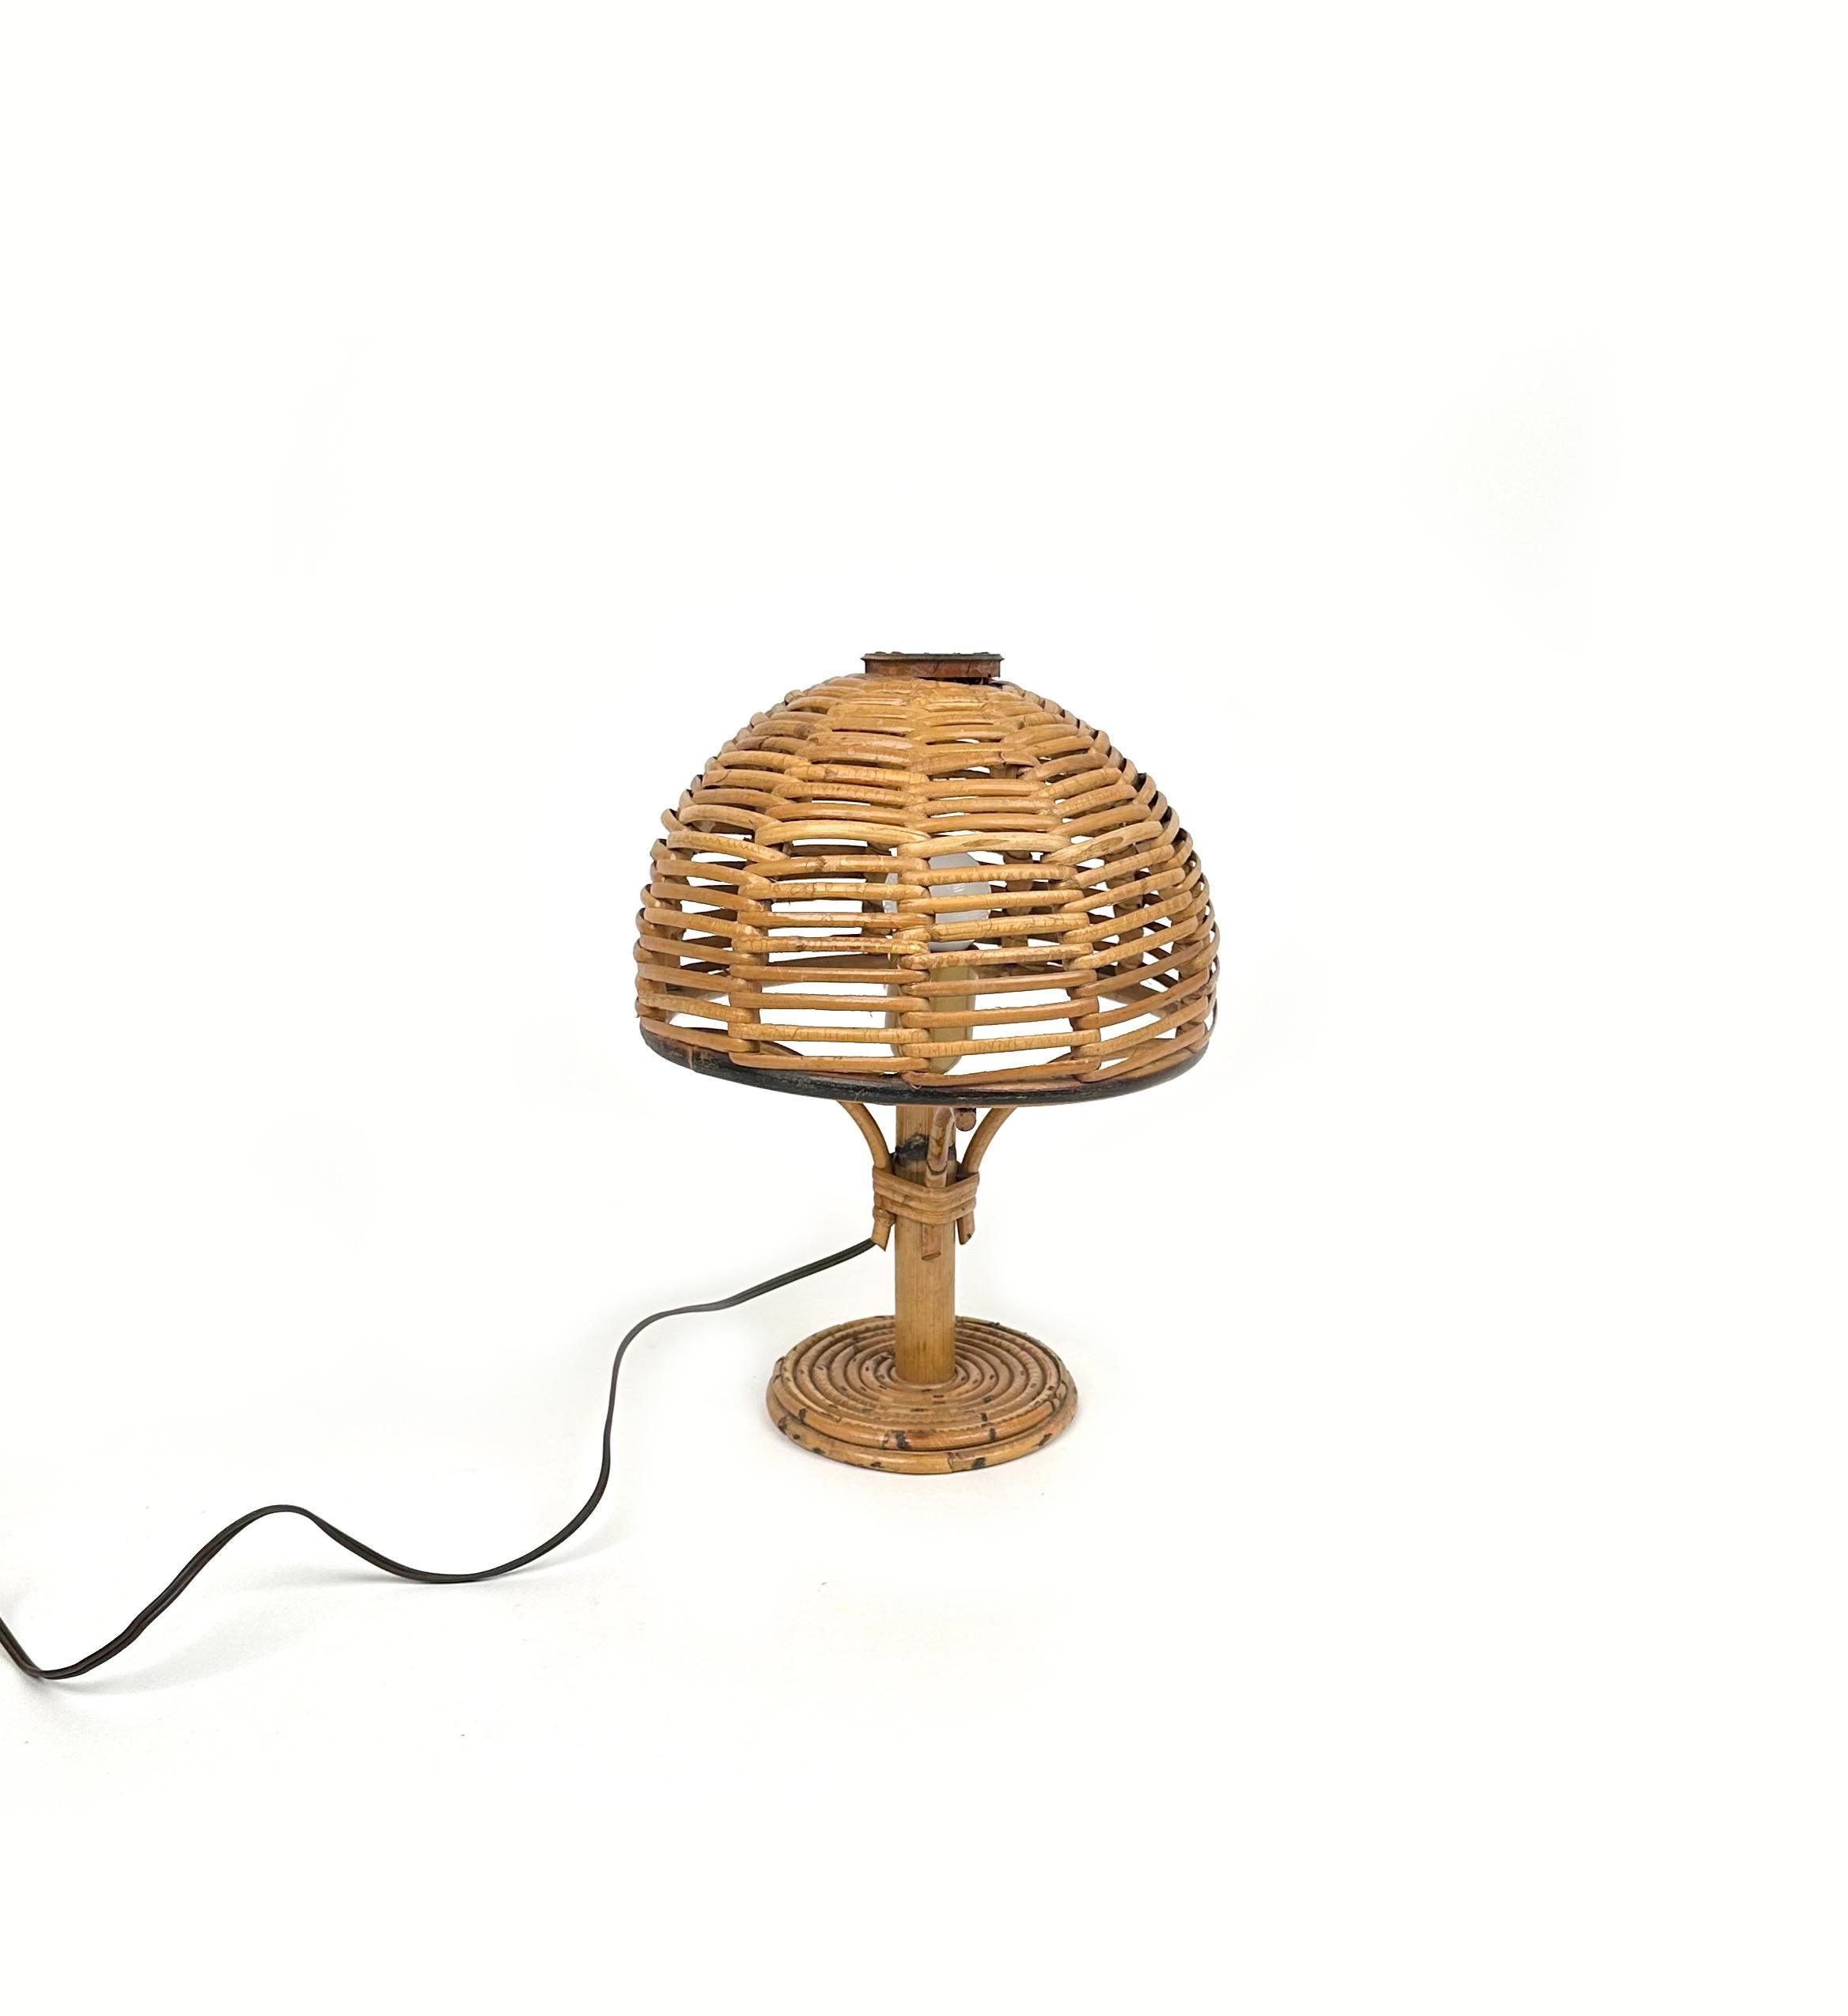 Midcentury Bamboo and Rattan Pair of Table Lamps Louis Sognot Style, Italy 1960s For Sale 3